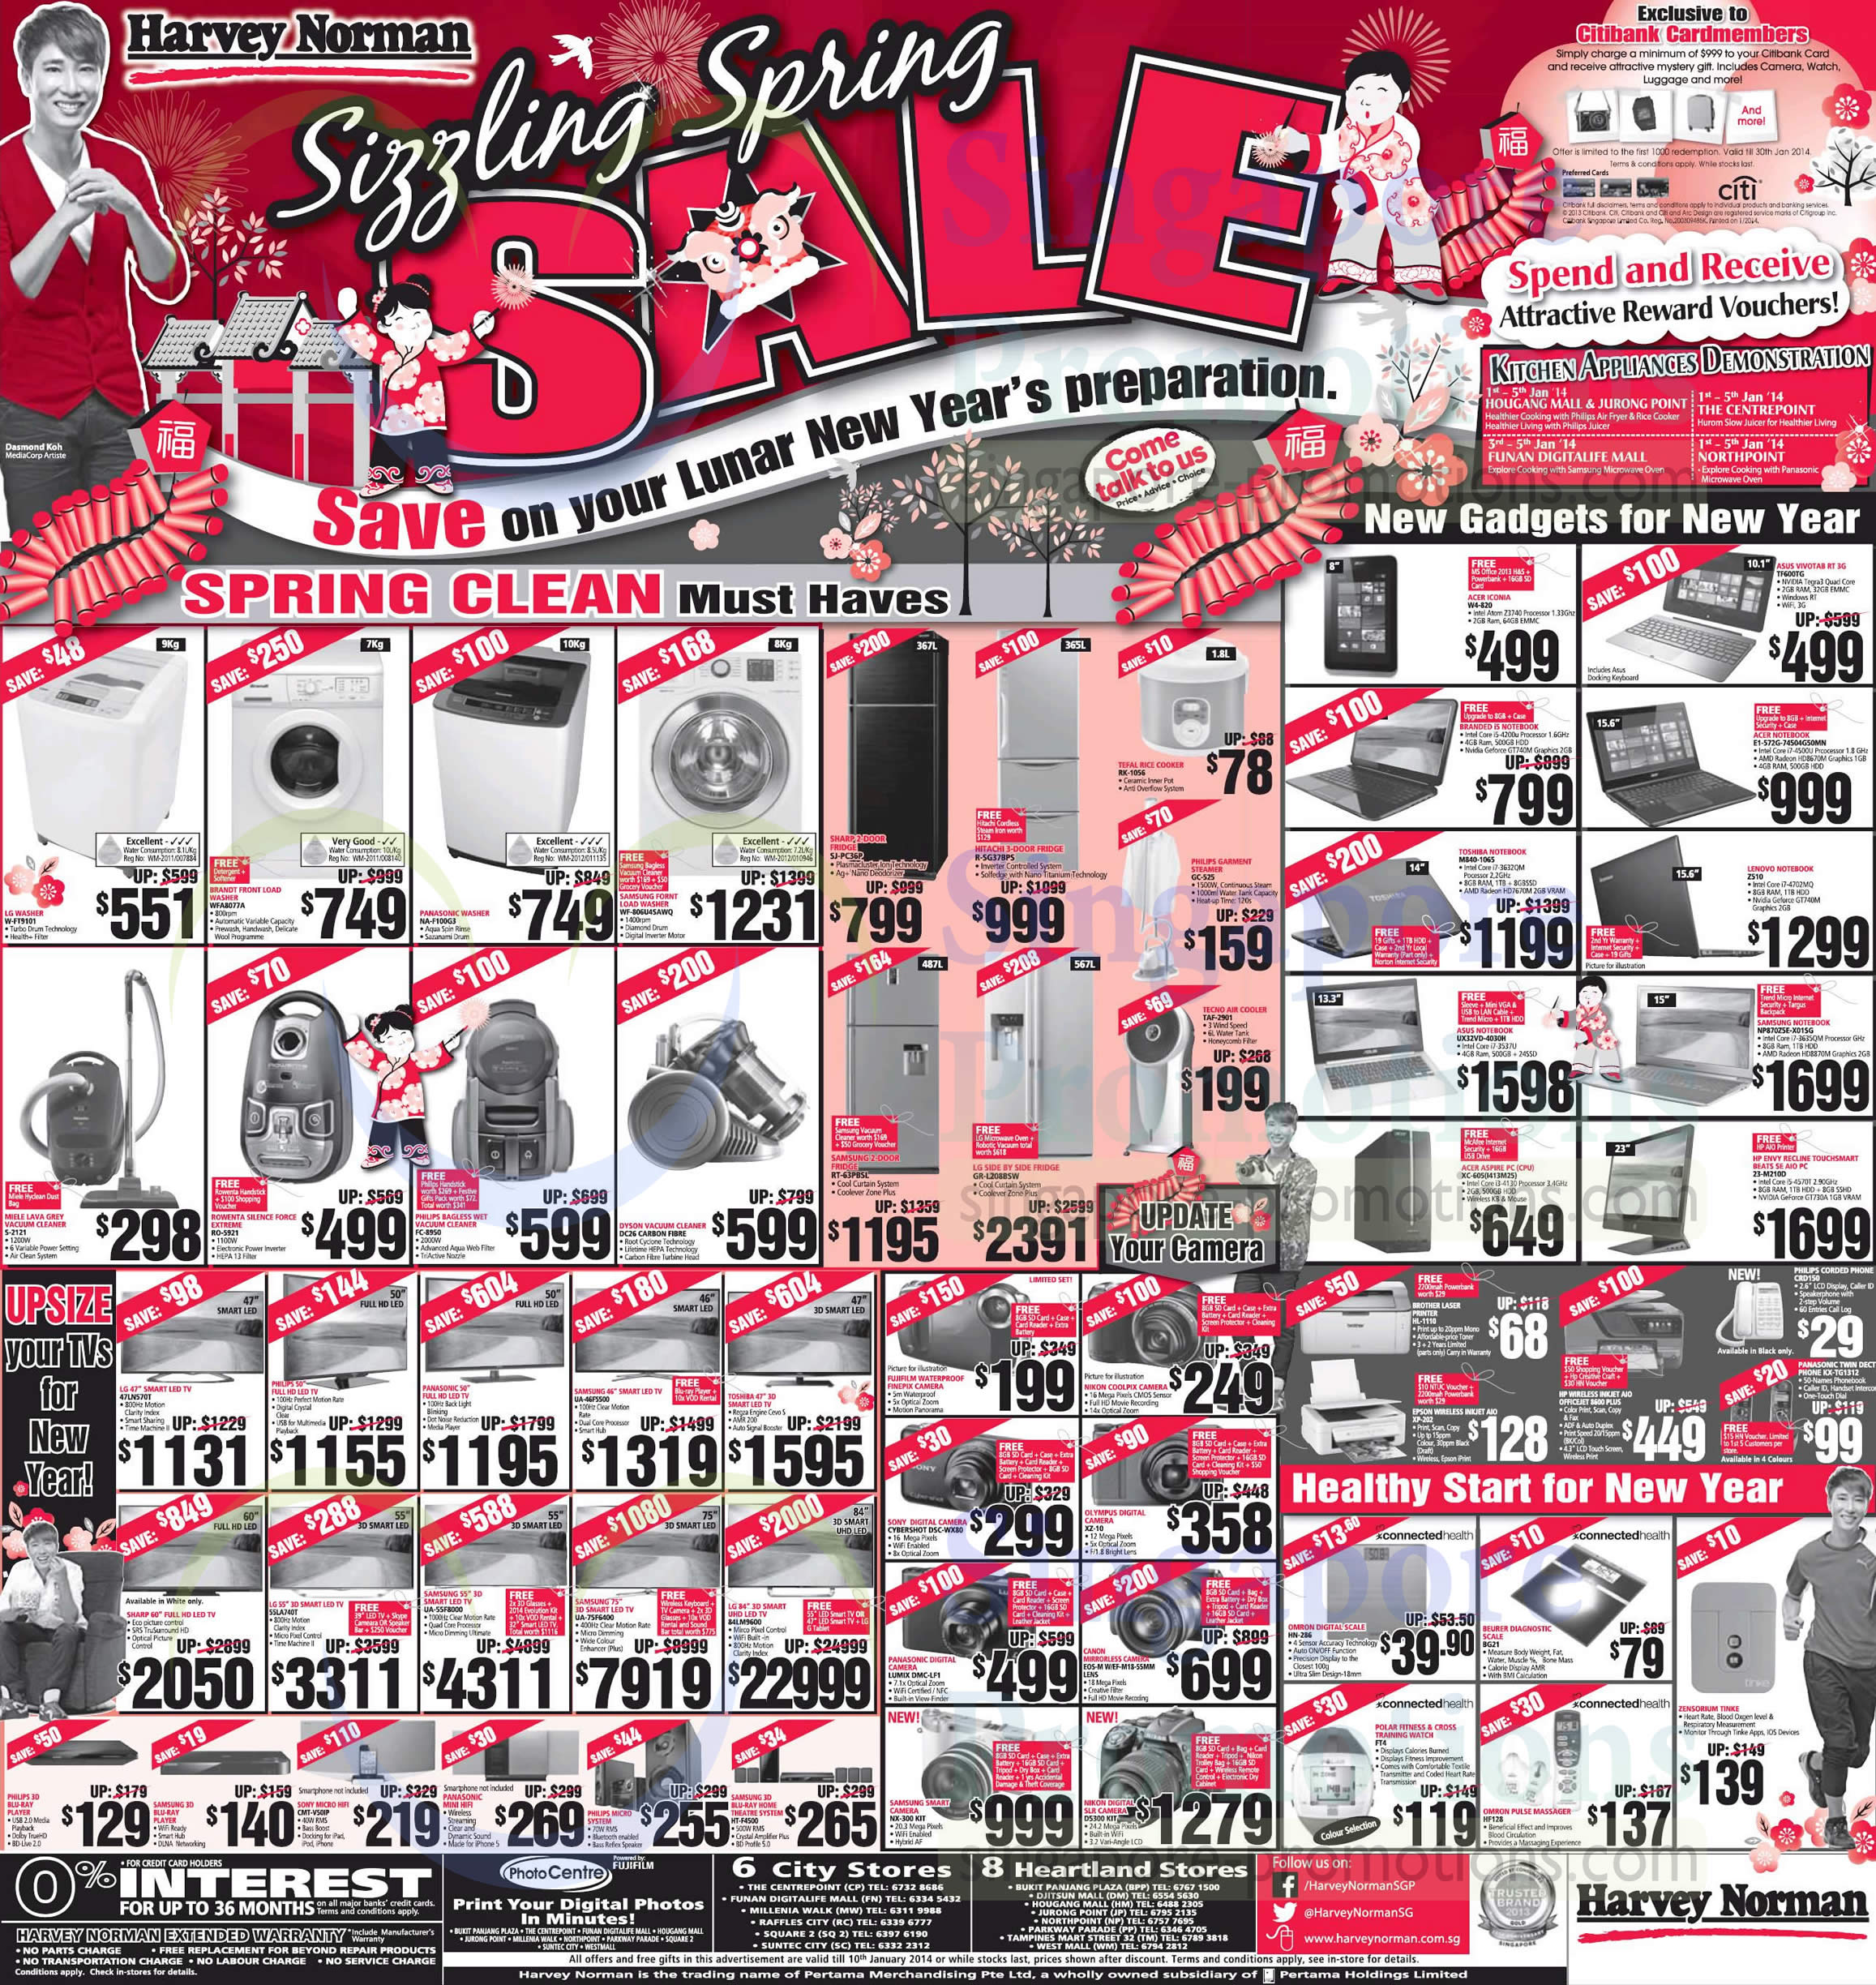 Featured image for Harvey Norman TVs, Audio Visual & Other Electronics Offers 4 - 10 Jan 2014